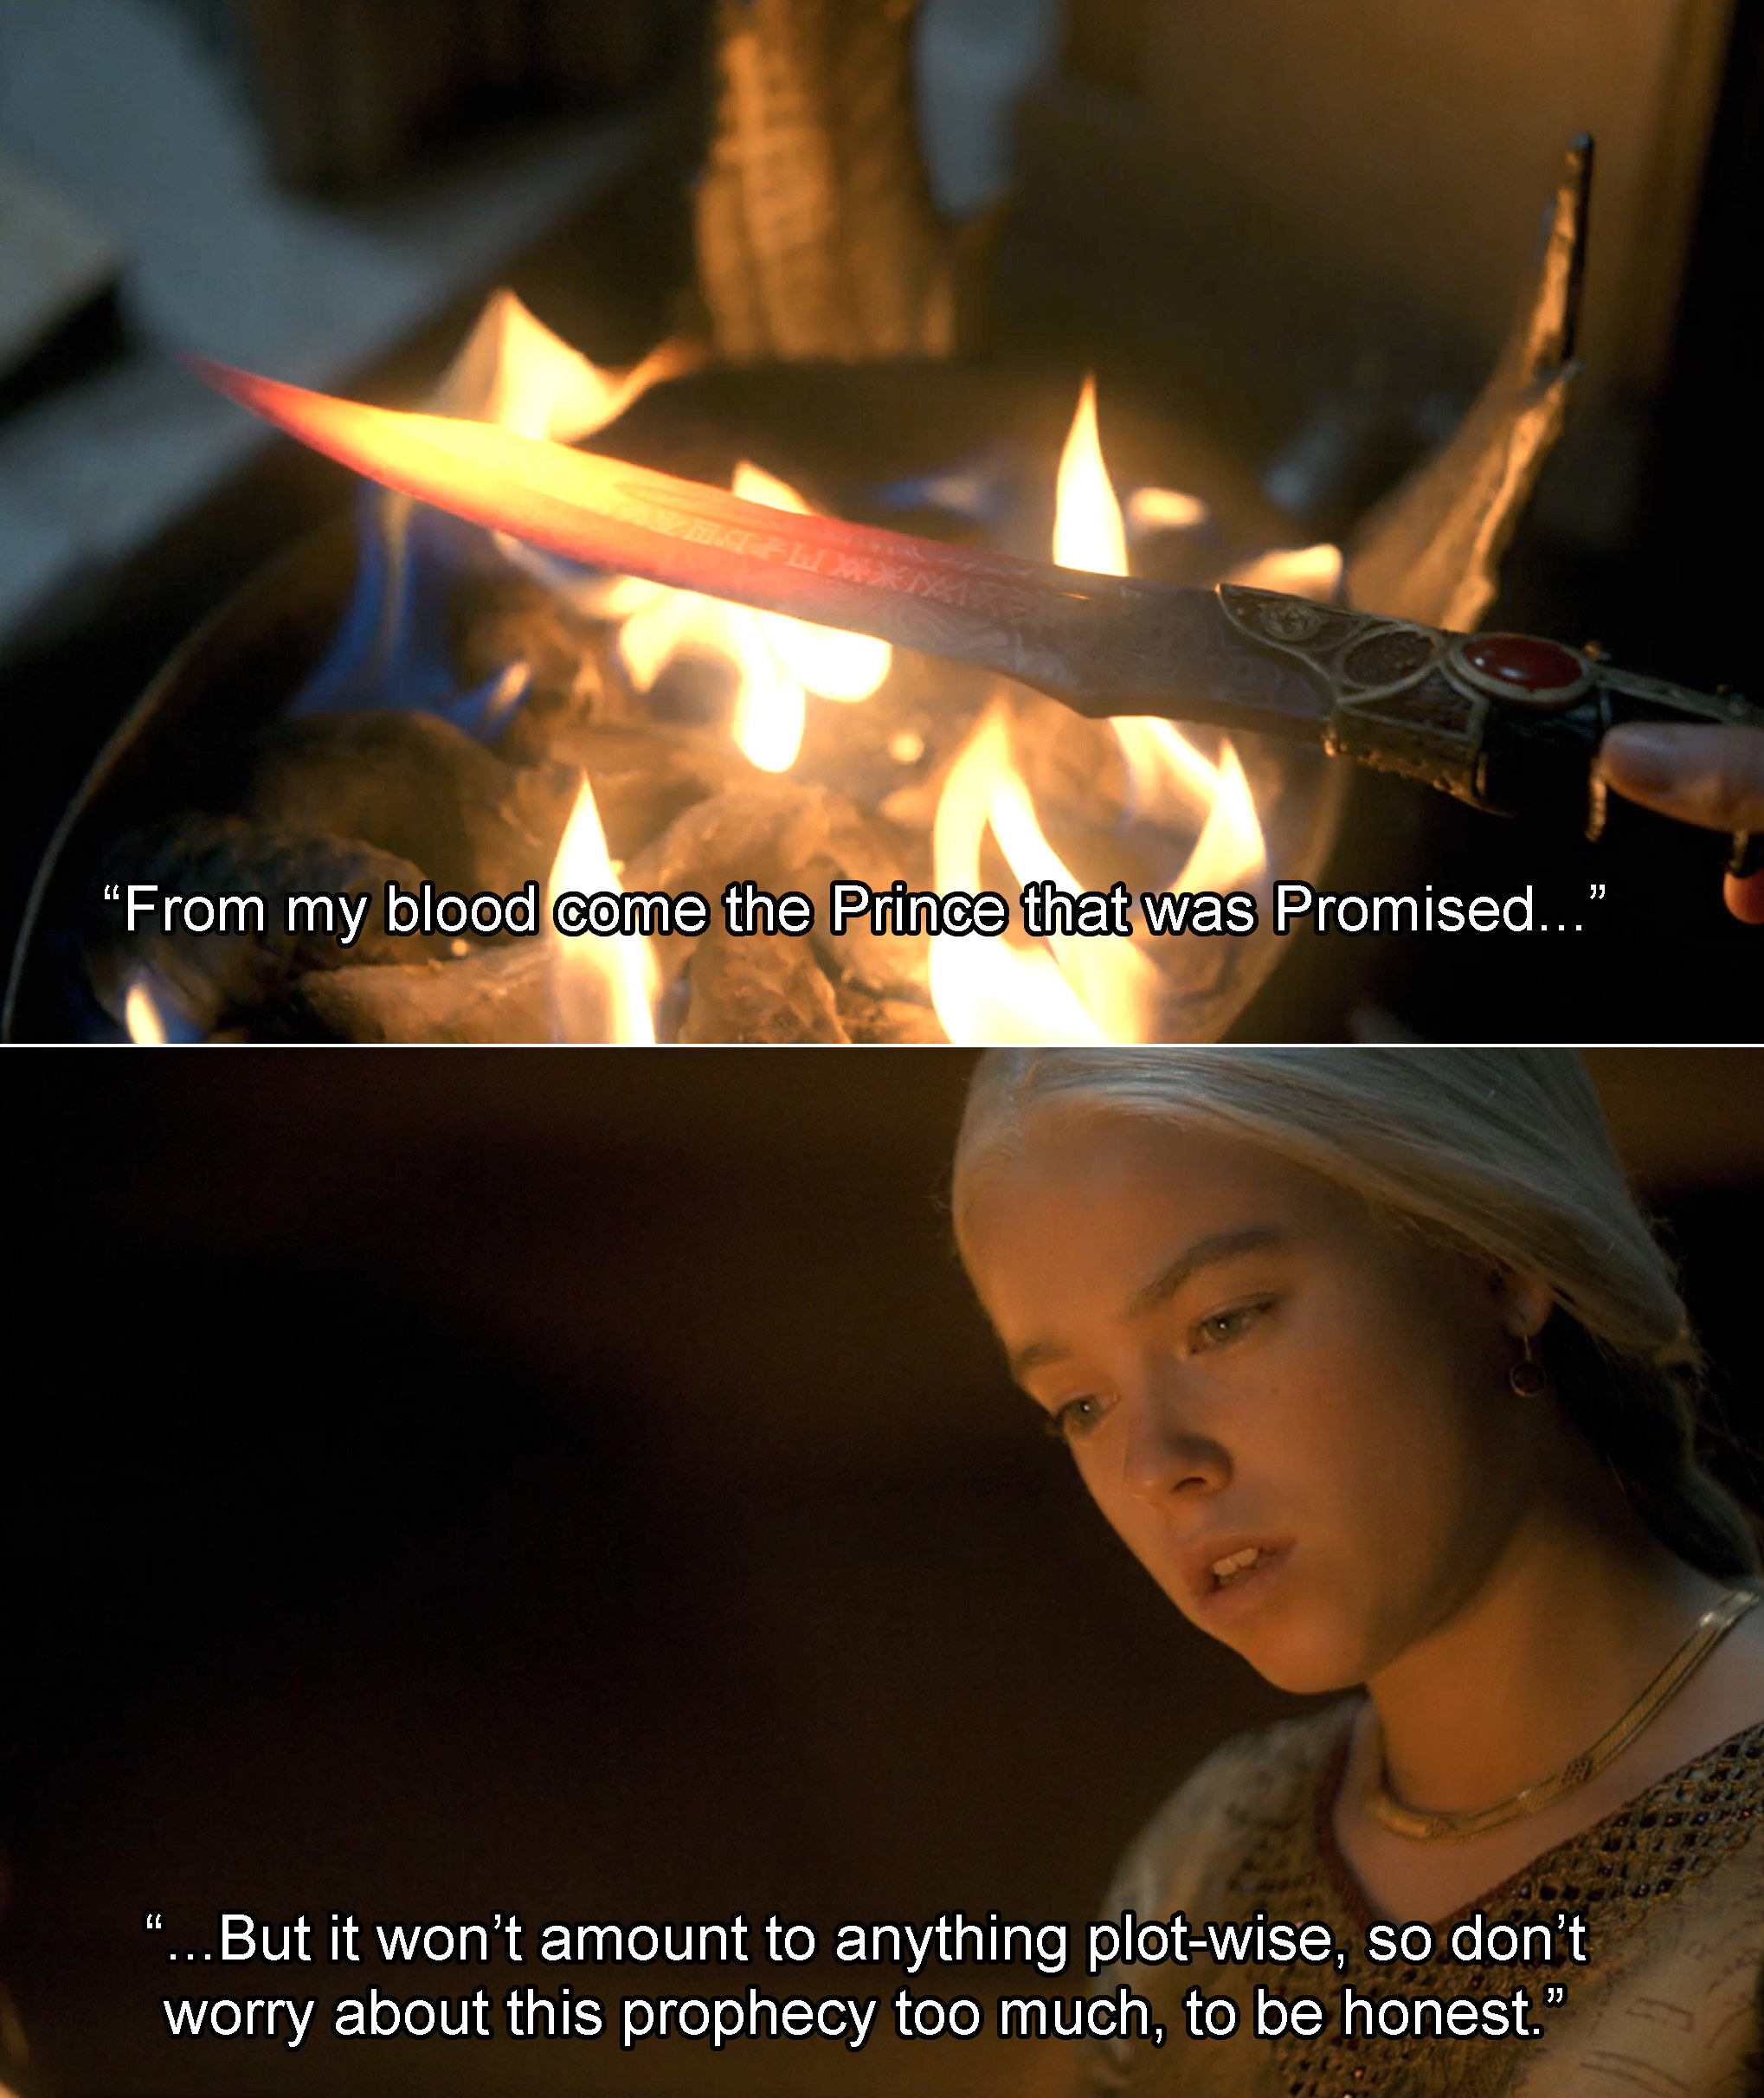 An image of a sword with fire, with caption &quot;From my blood come the prince that was promised,&quot; and then Rhaenyra, with caption &quot;But it won&#x27;t amount to anything plot-wise, so don&#x27;t worry about this prophecy too much, tbh&quot;